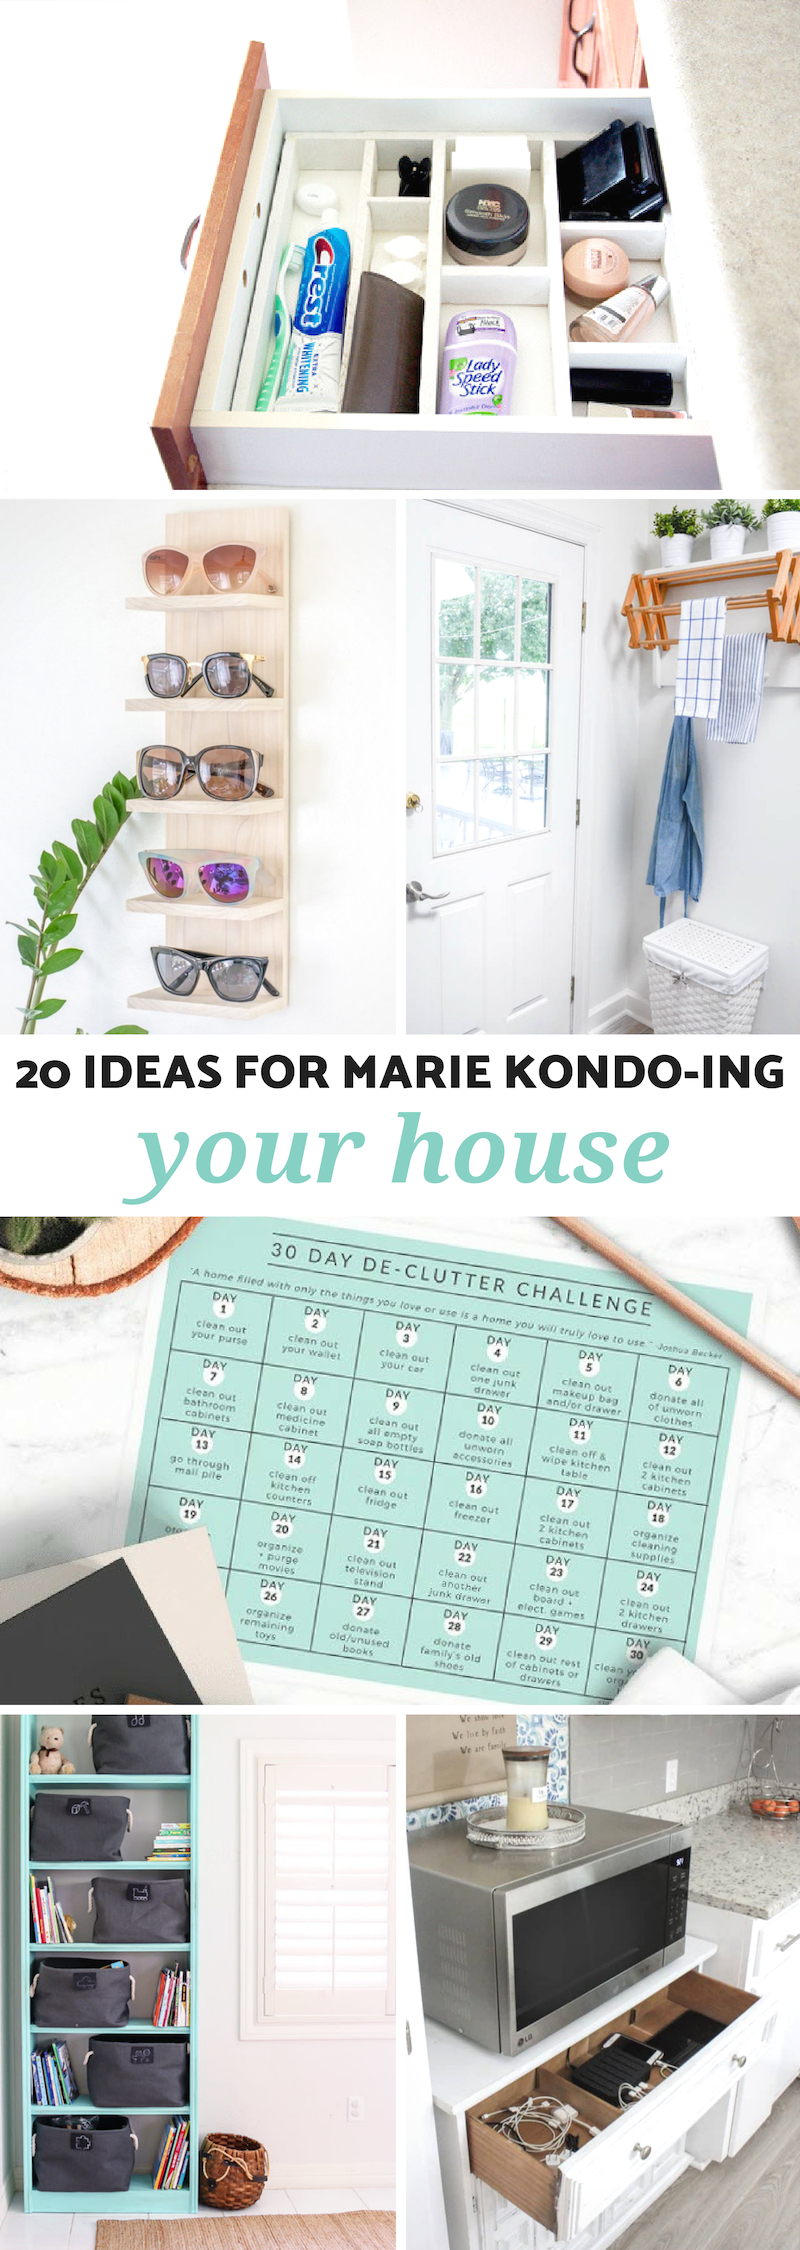 Ideas for Marie Kondo-ing Your House